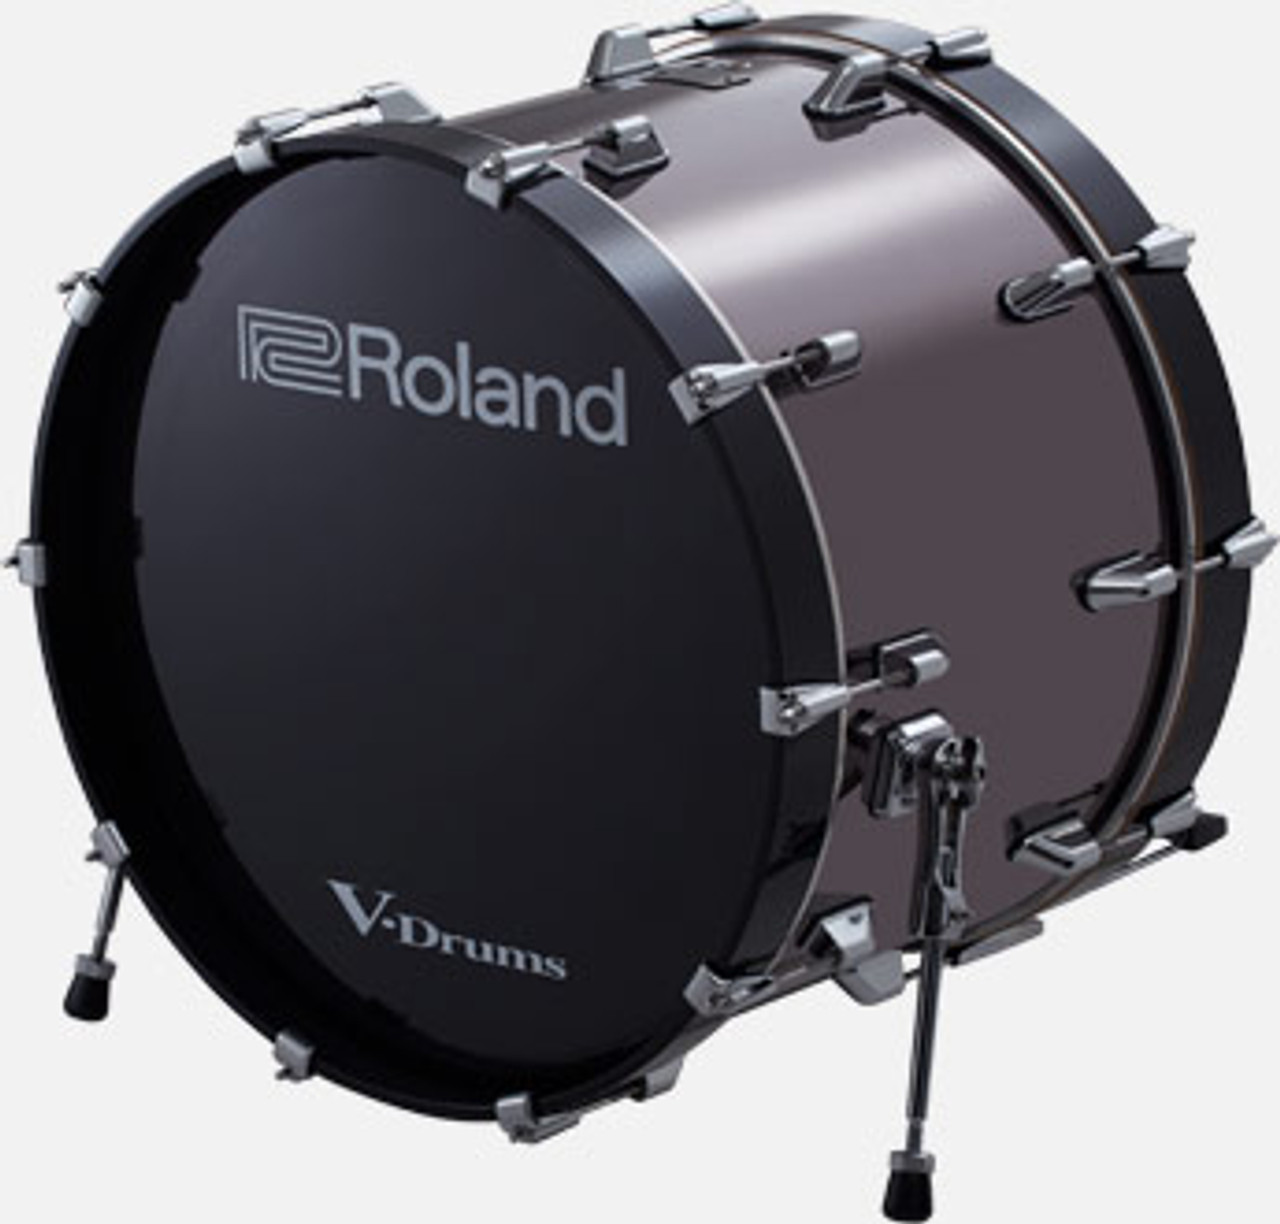 Bring the look and feel of a 22-inch acoustic bass drum to any V-Drums kit